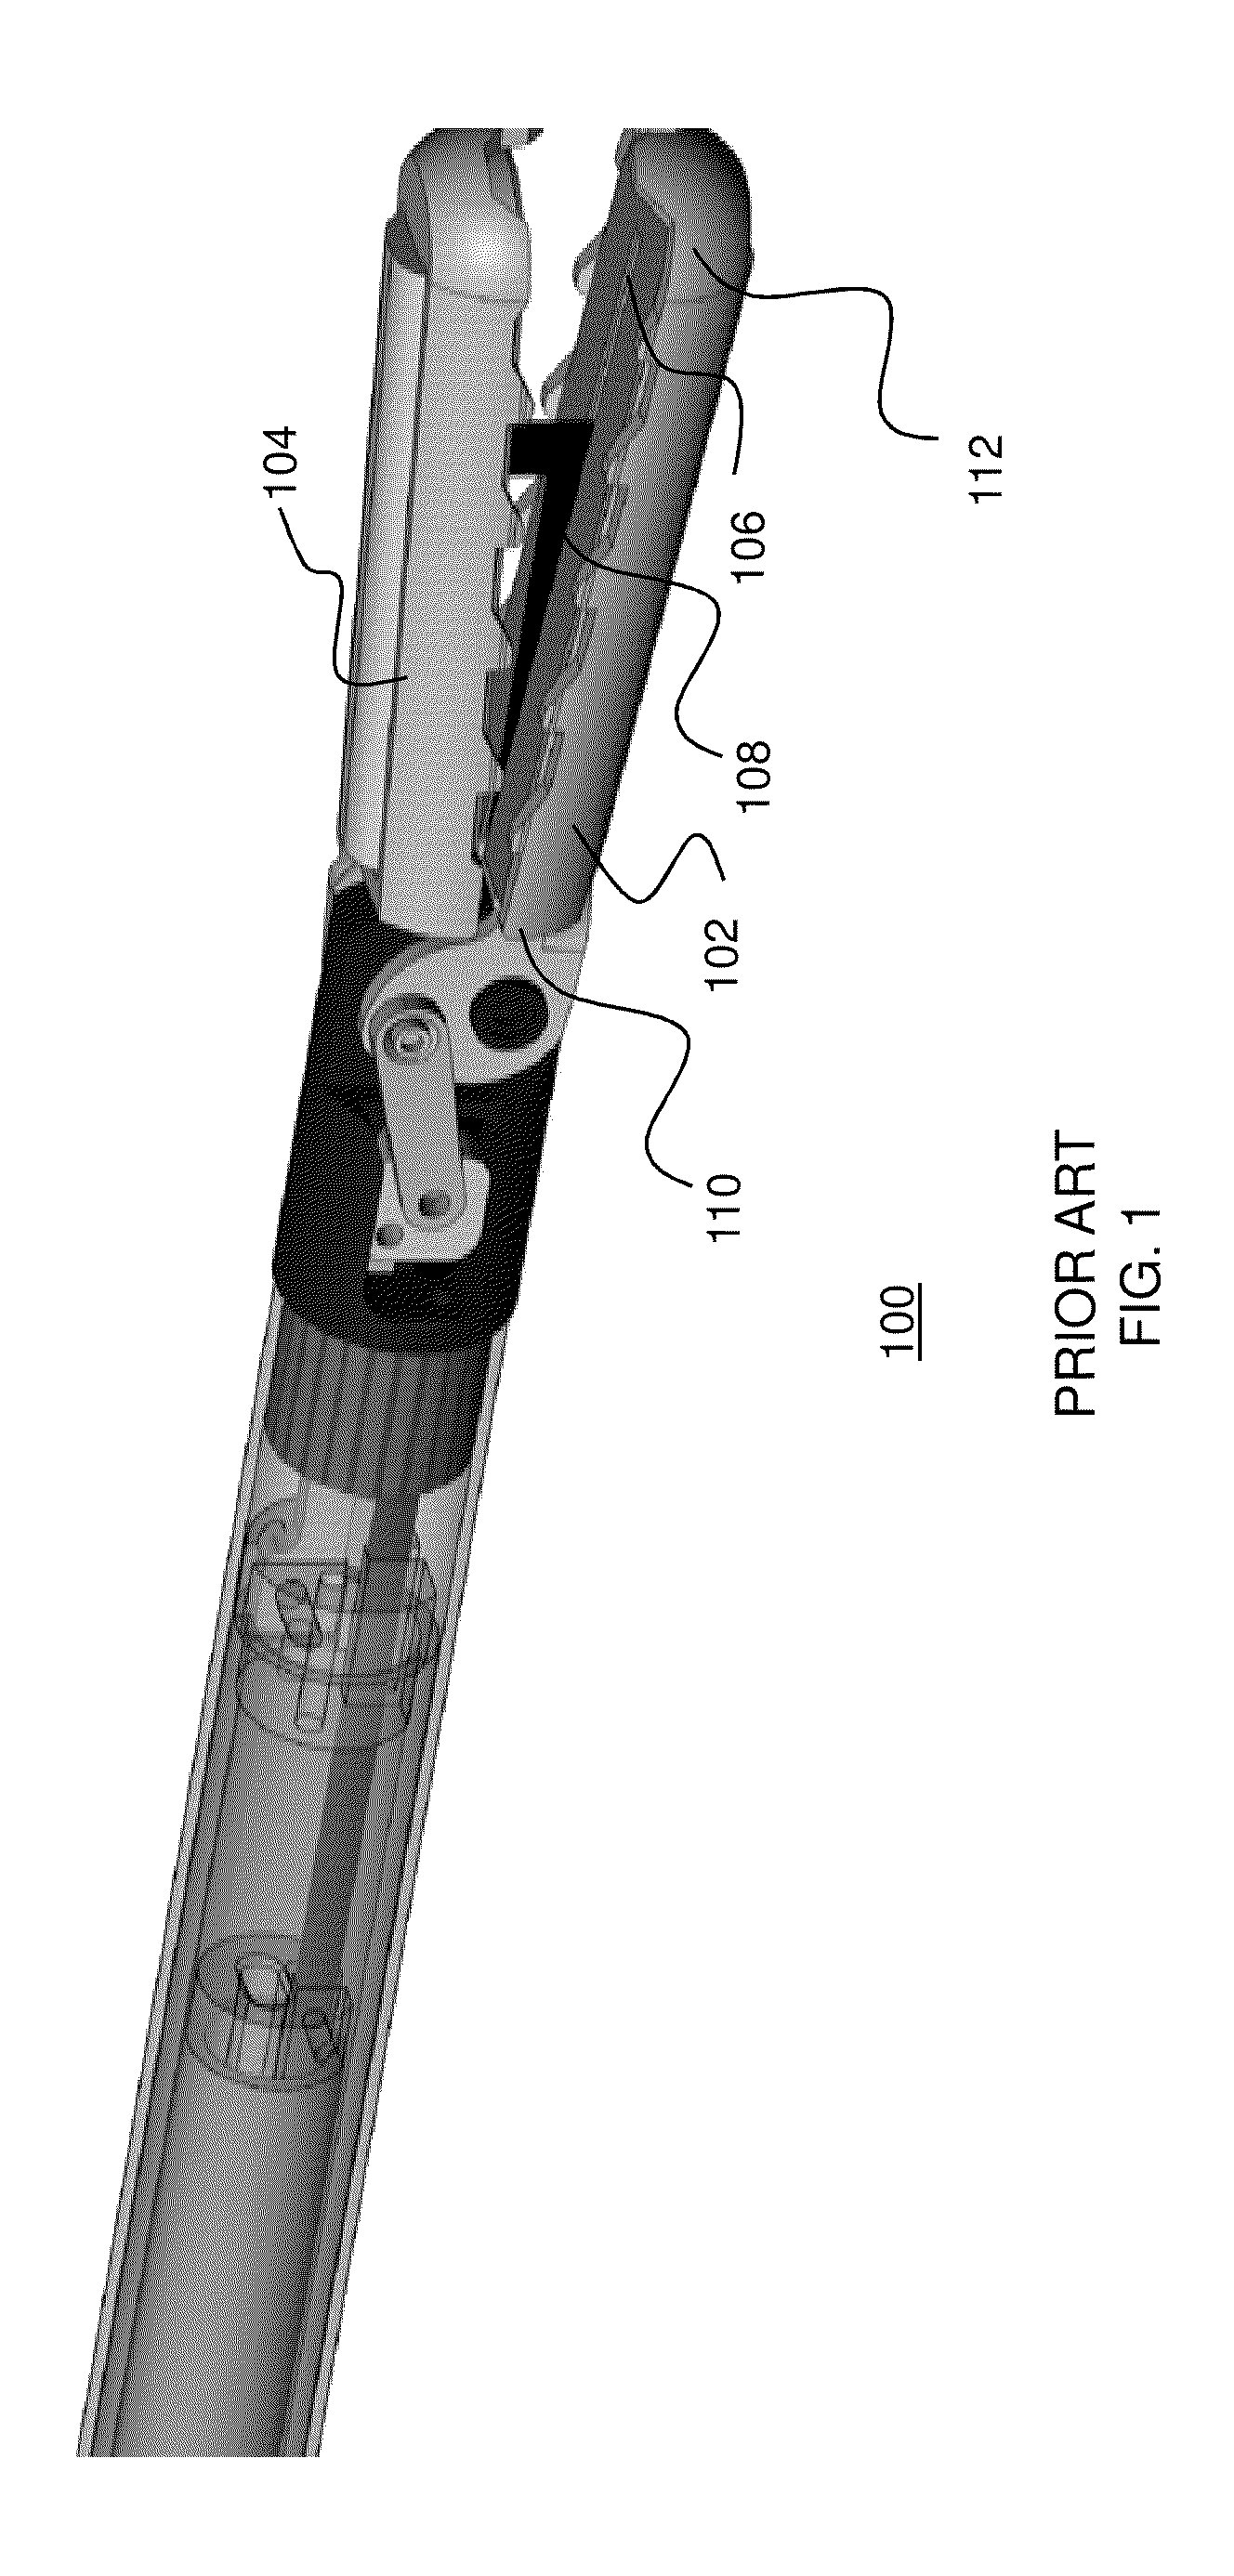 Medical Ultrasonic Cauterization and Cutting Device and Method